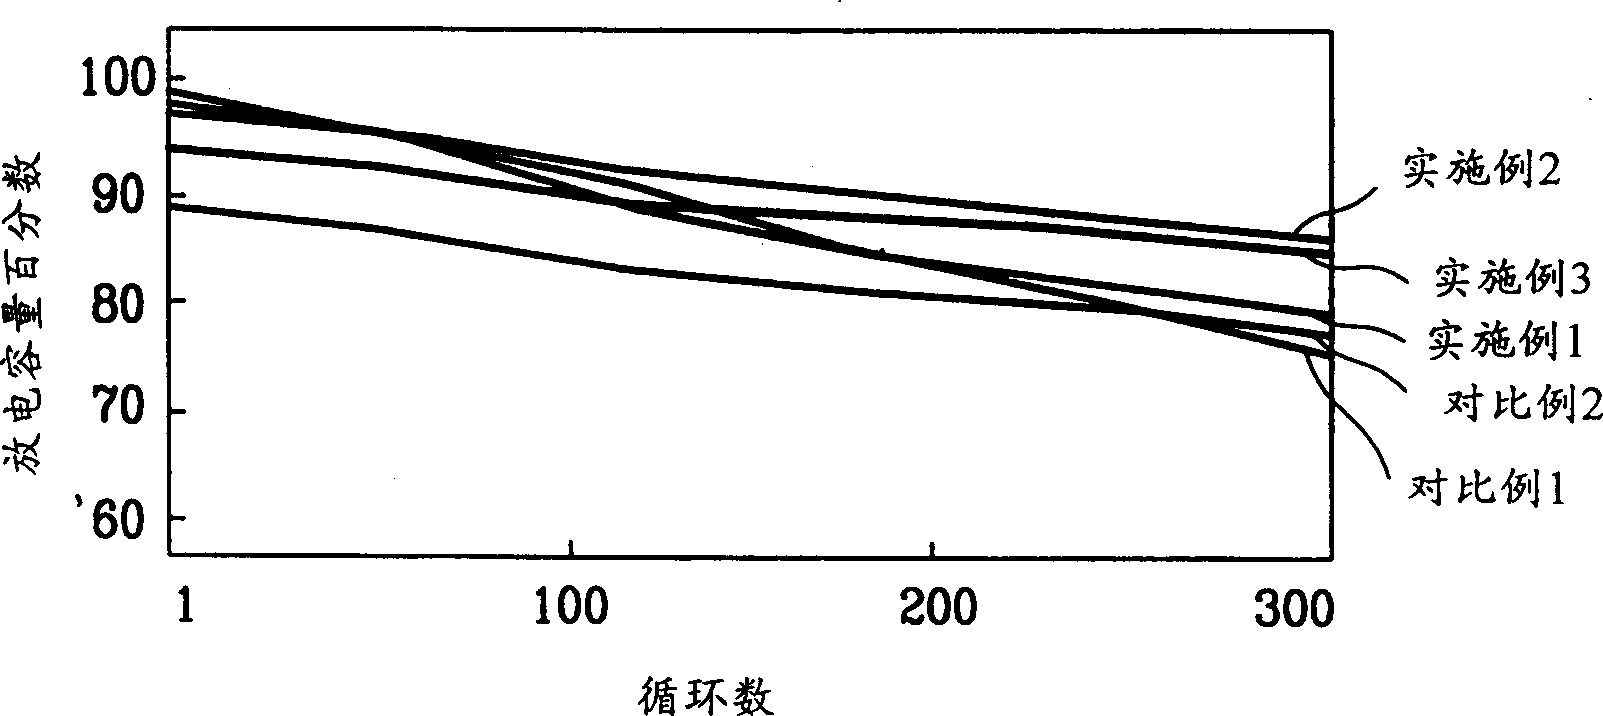 Anhydrous electrolyte of lithium storage battery, and lithium storage battery containing said electrolyte